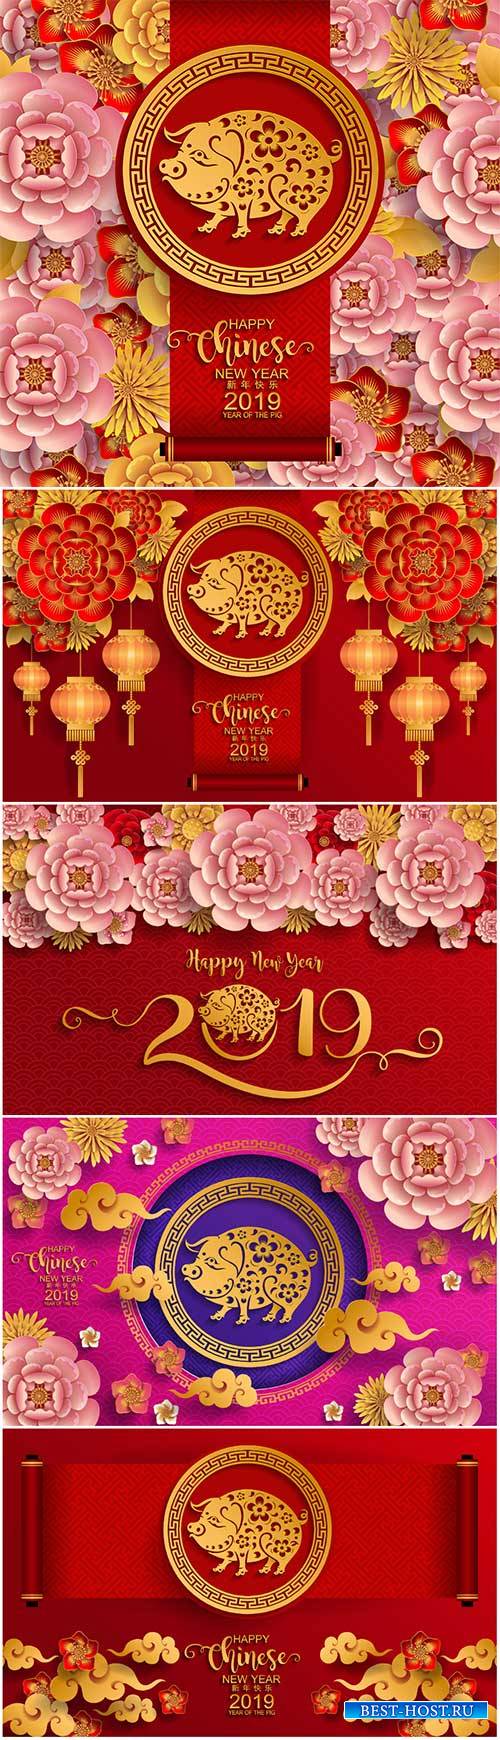 Pig year 2019 chinese luxury vector card # 2